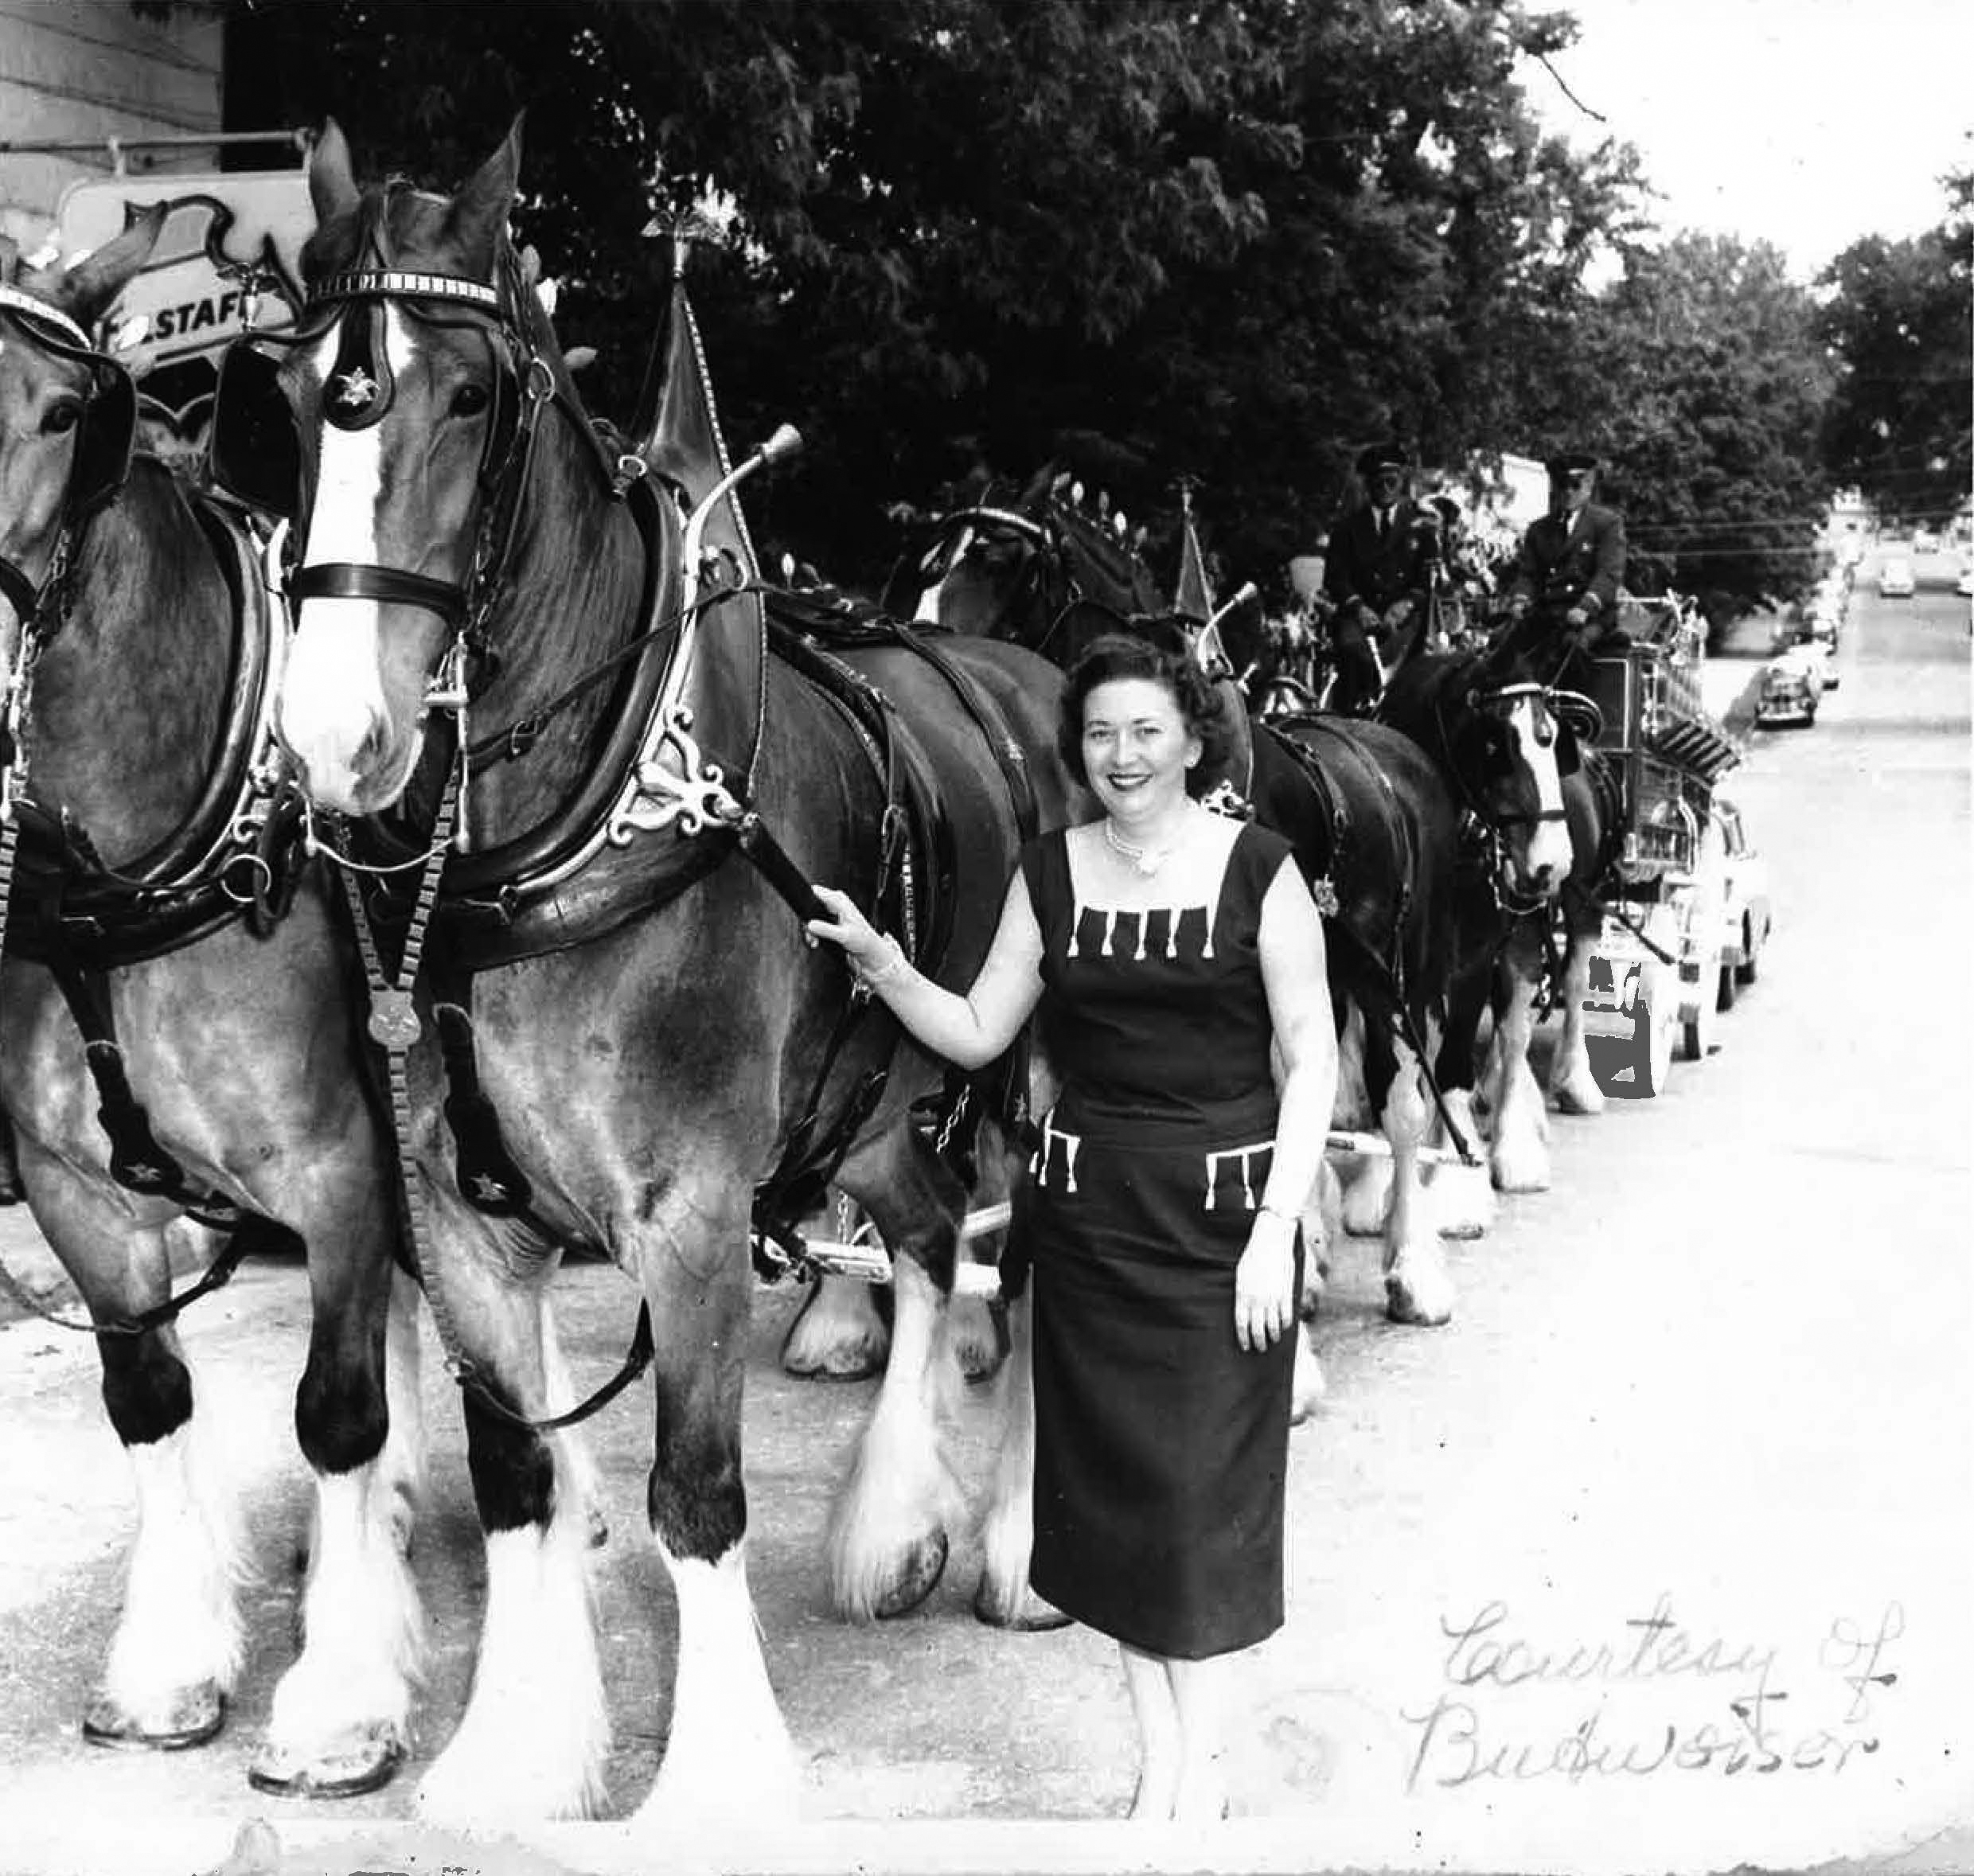 Maxine with Clydesdales - 1960ish - Partial Pic.jpg